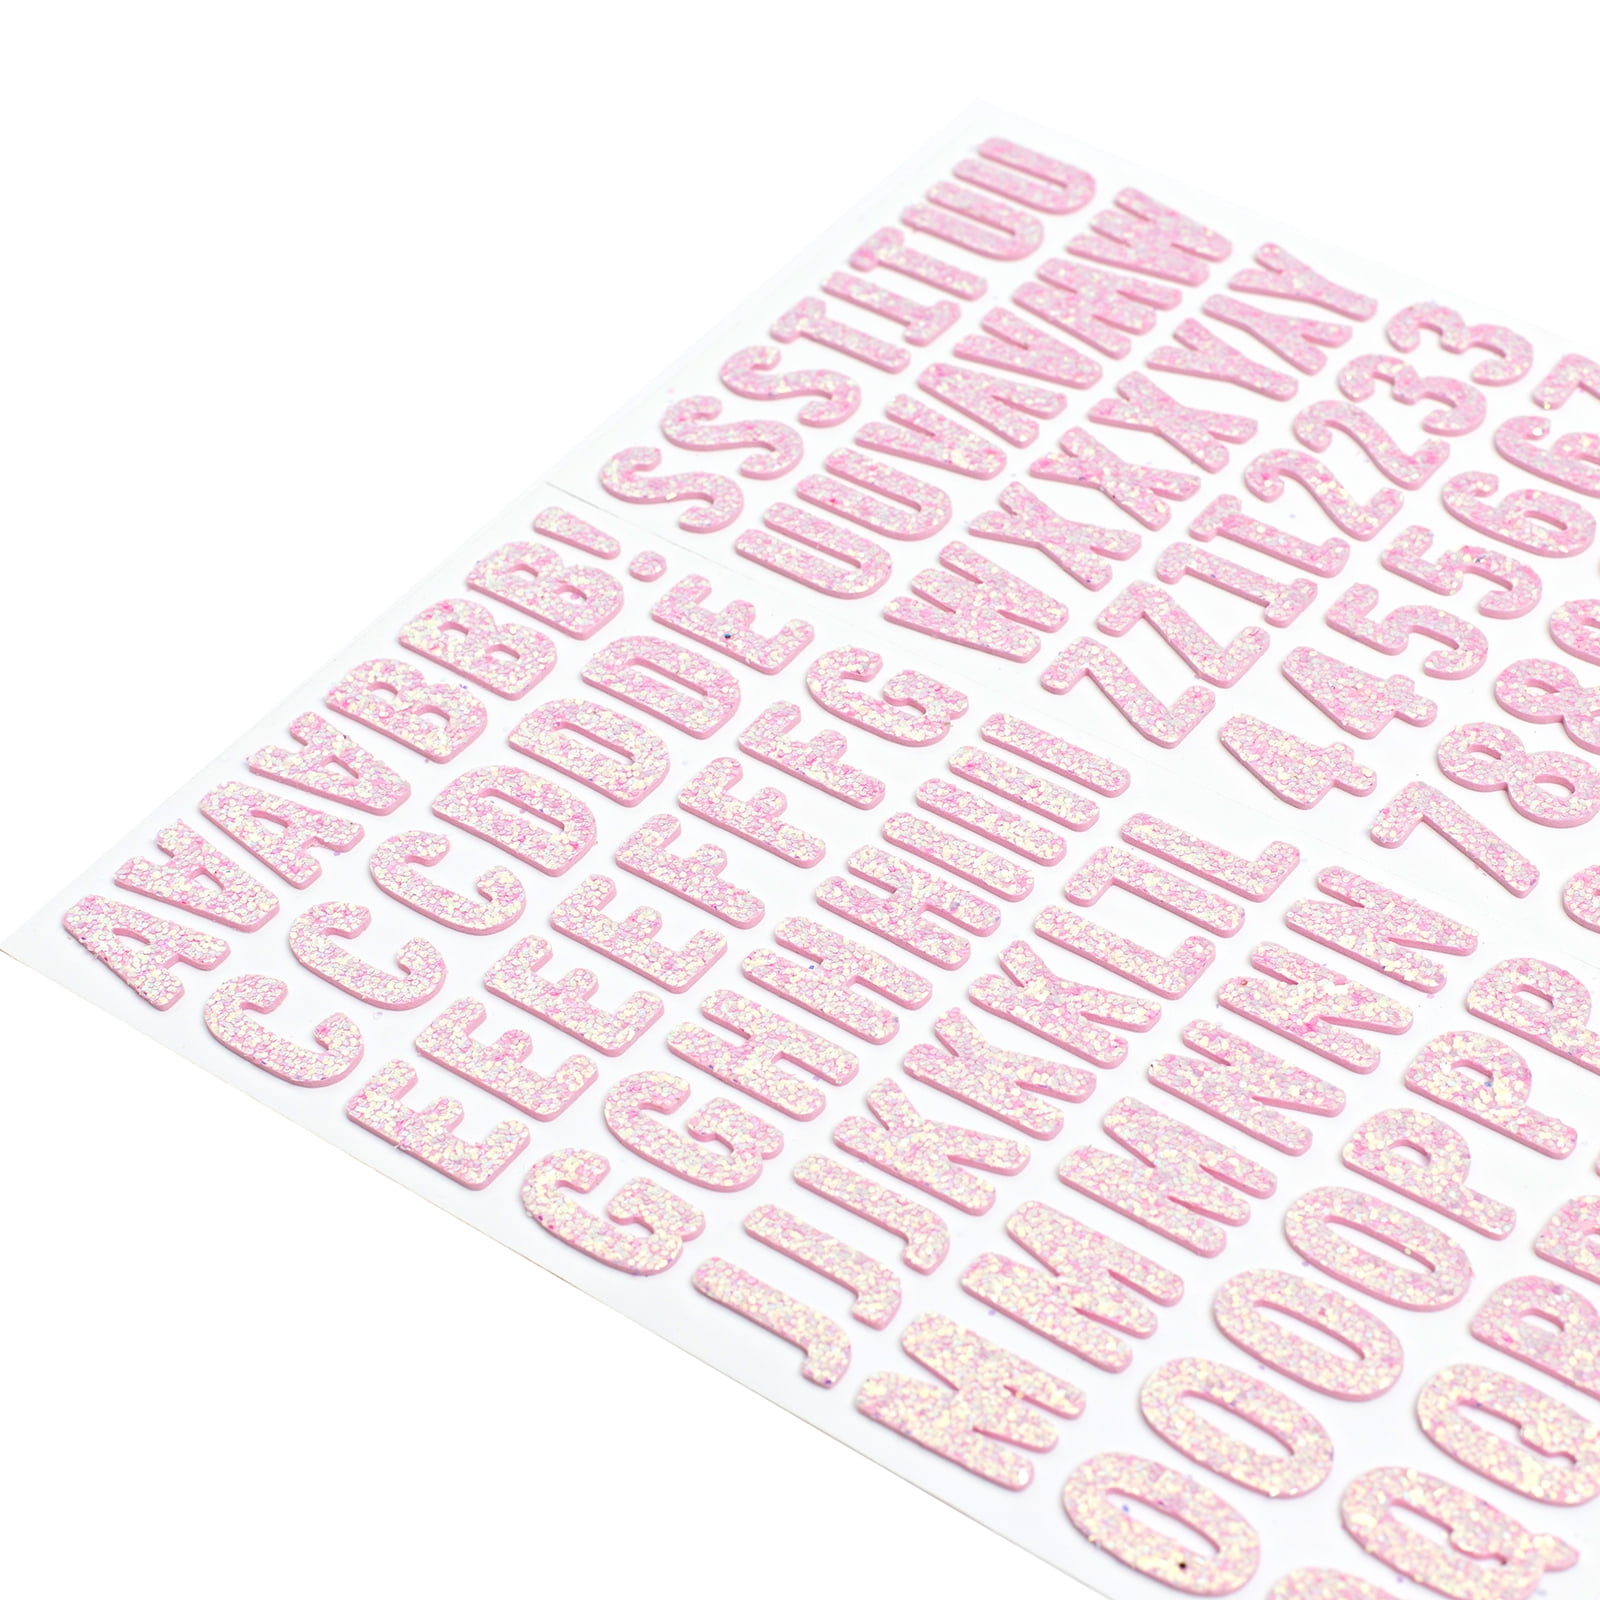 Magenta Bright Pink Glitter Letter Number Stickers, Craft BUJO Alphabet  Stickers, Craft Project Letters Sticker BBB Supplies R-E015 